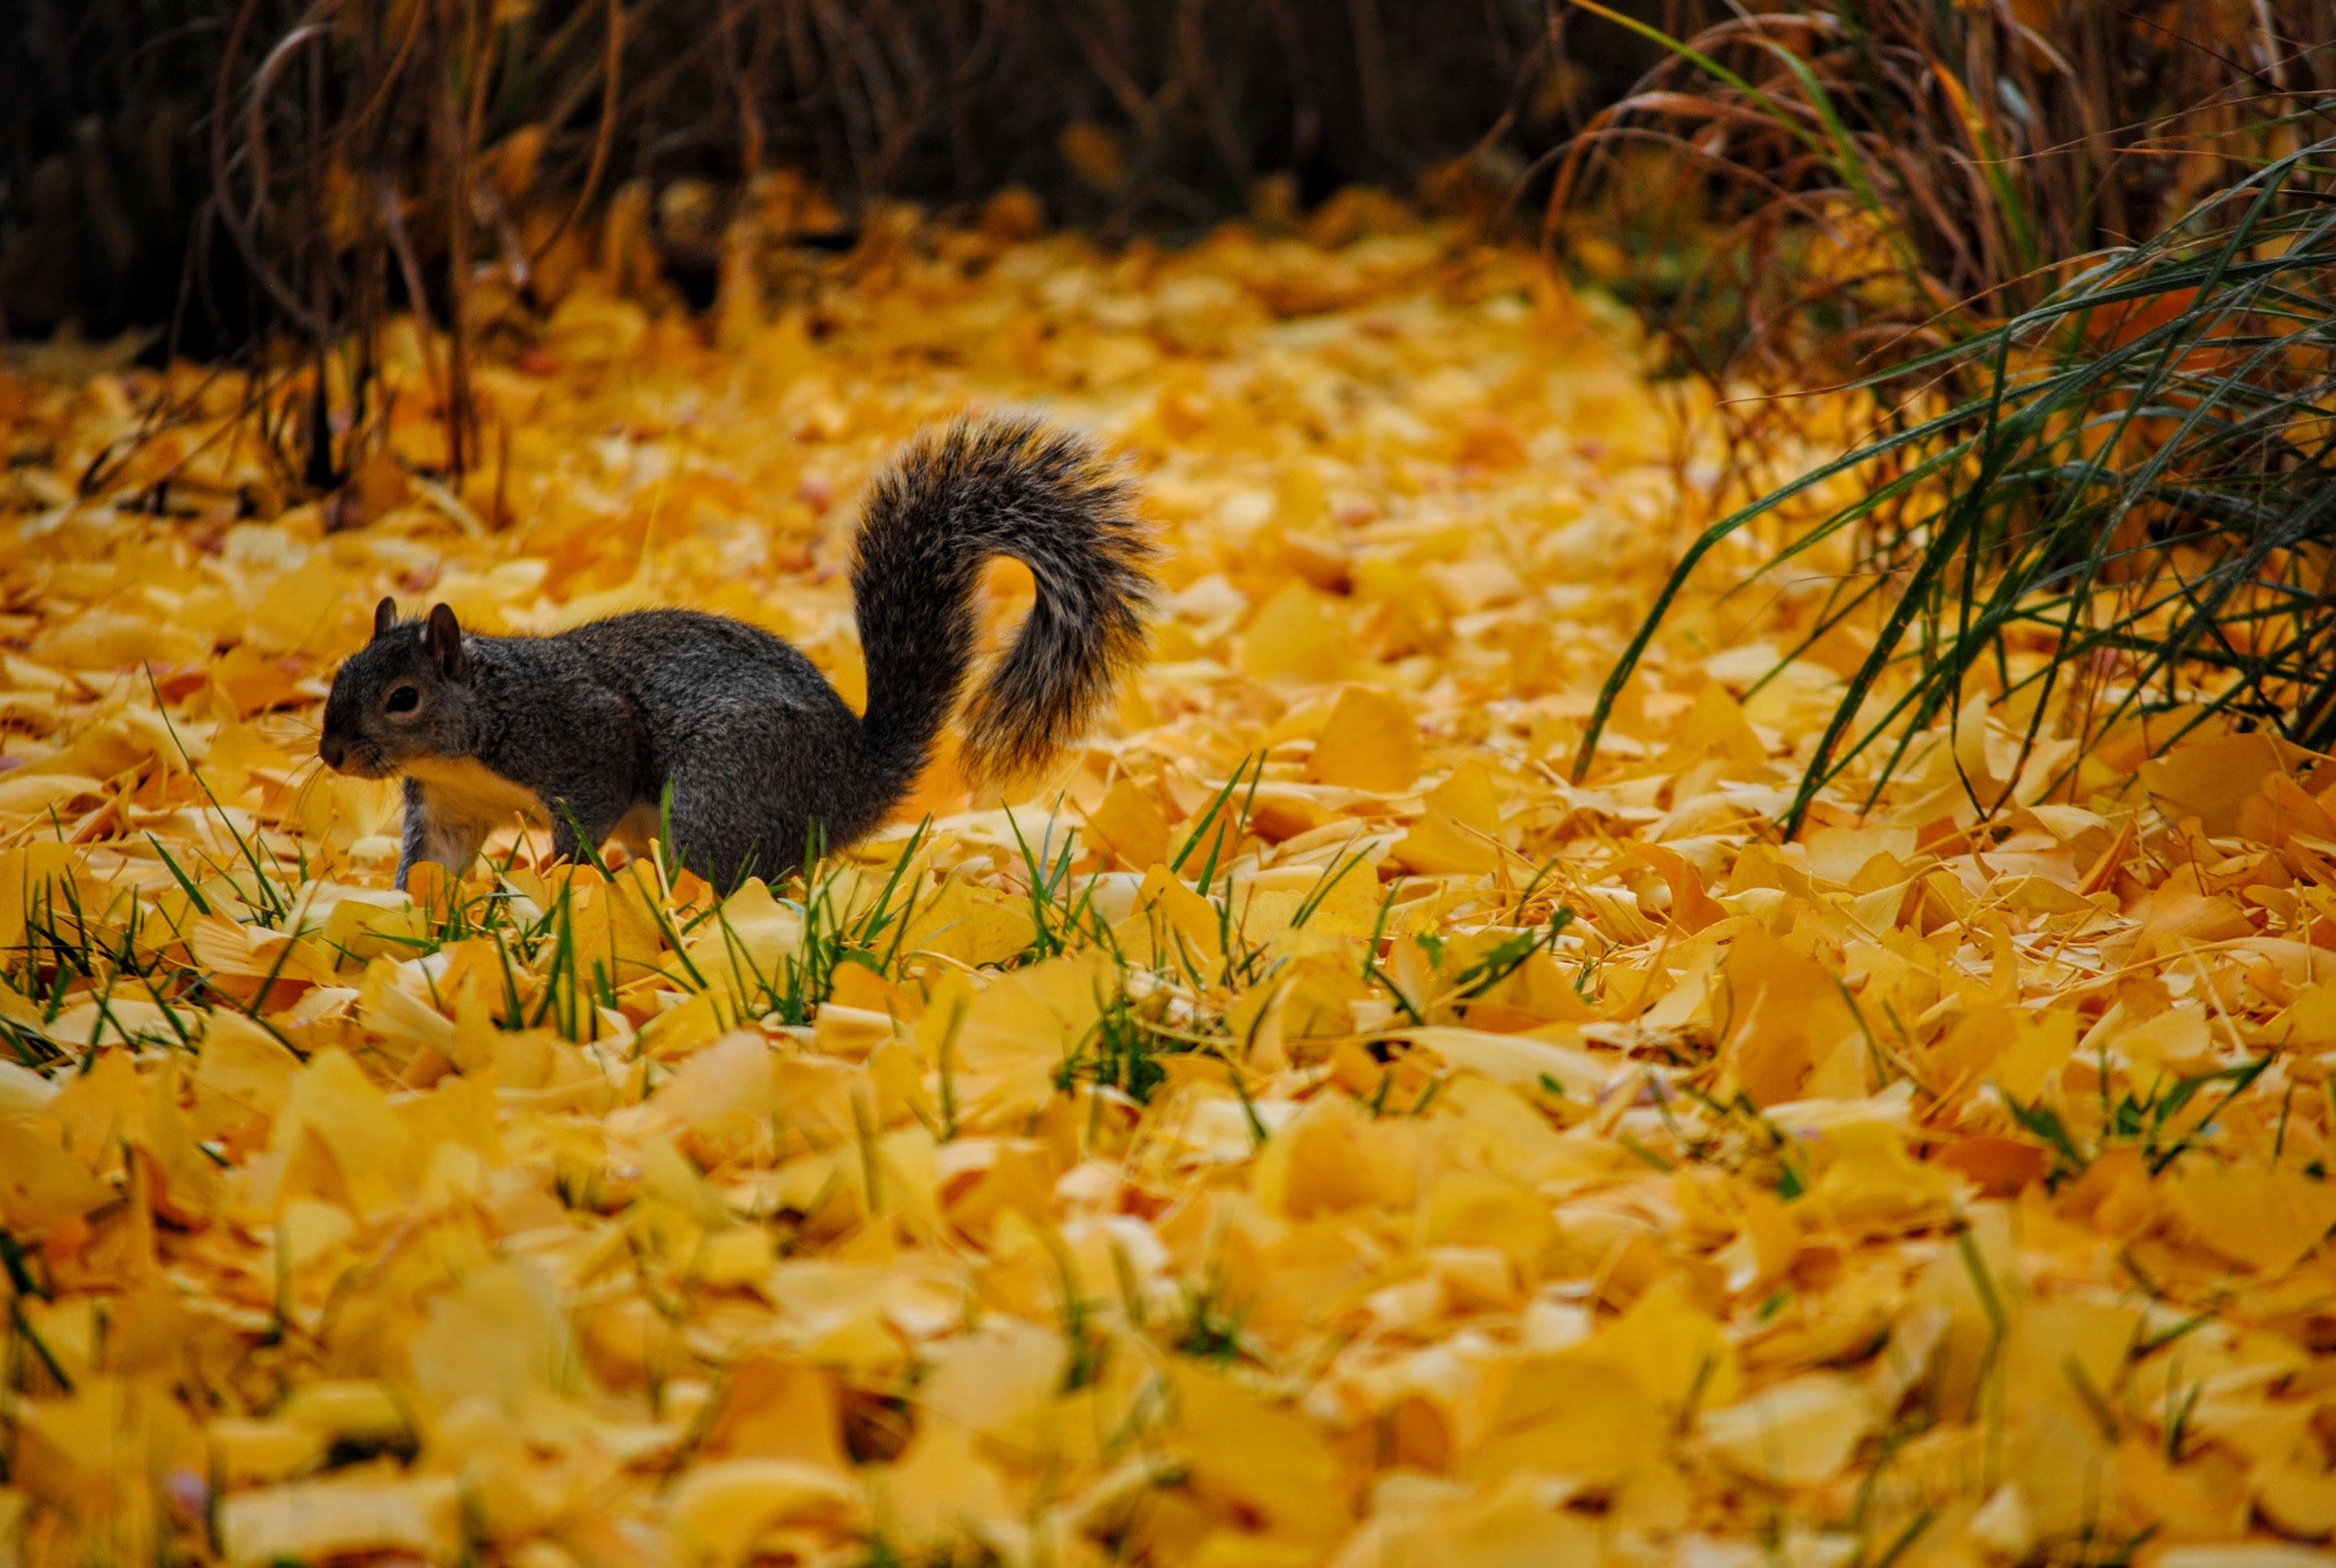 A squirrel sneaks across the yellow leaves